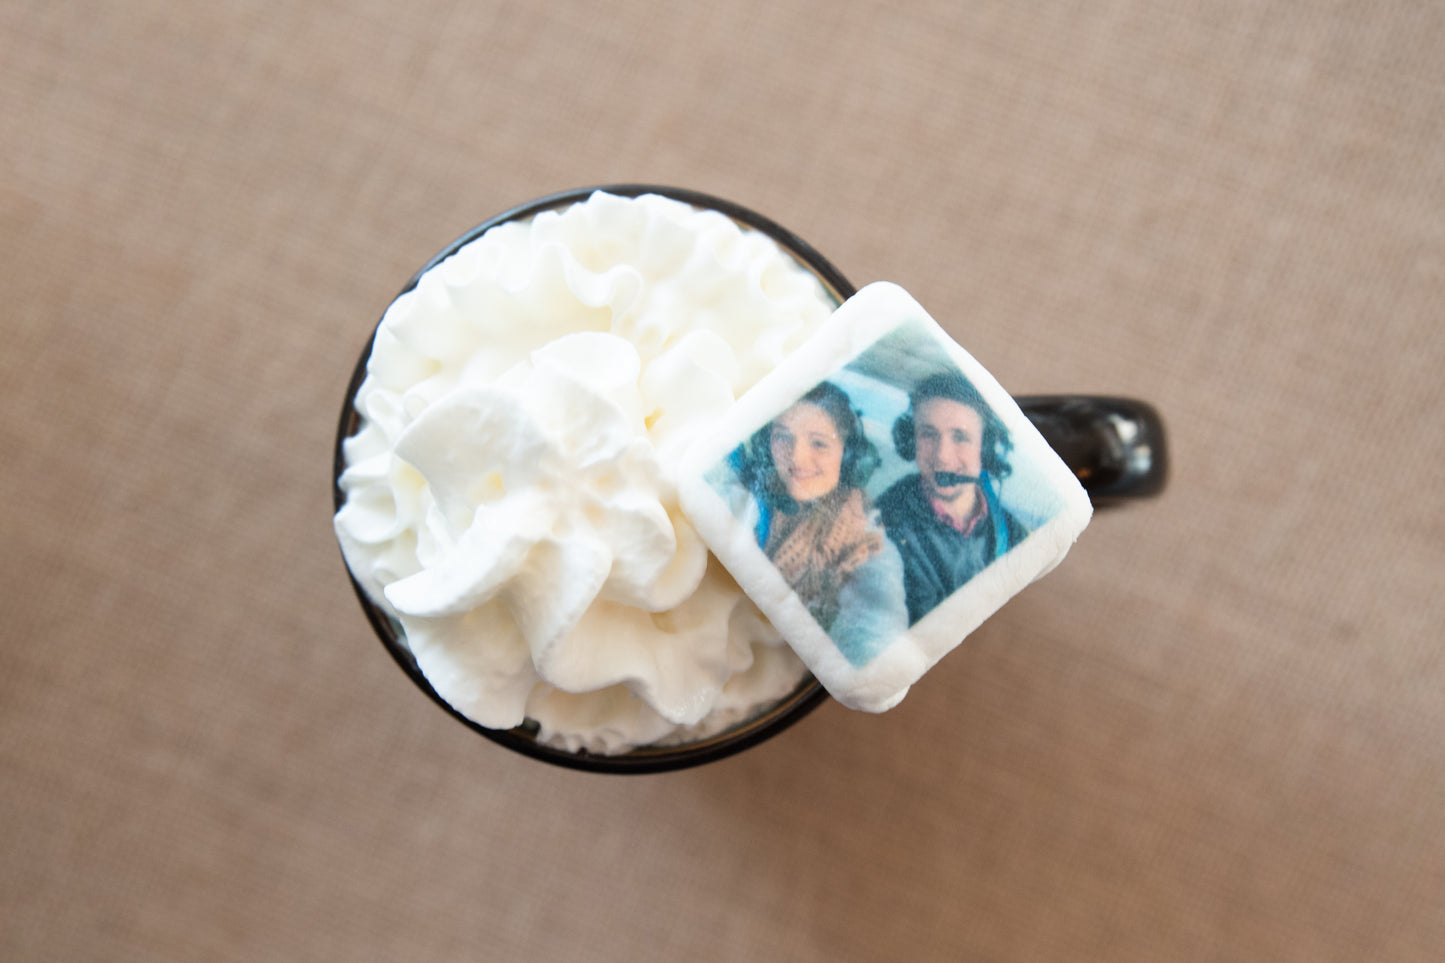 Personalized Marshmallows for the Holidays